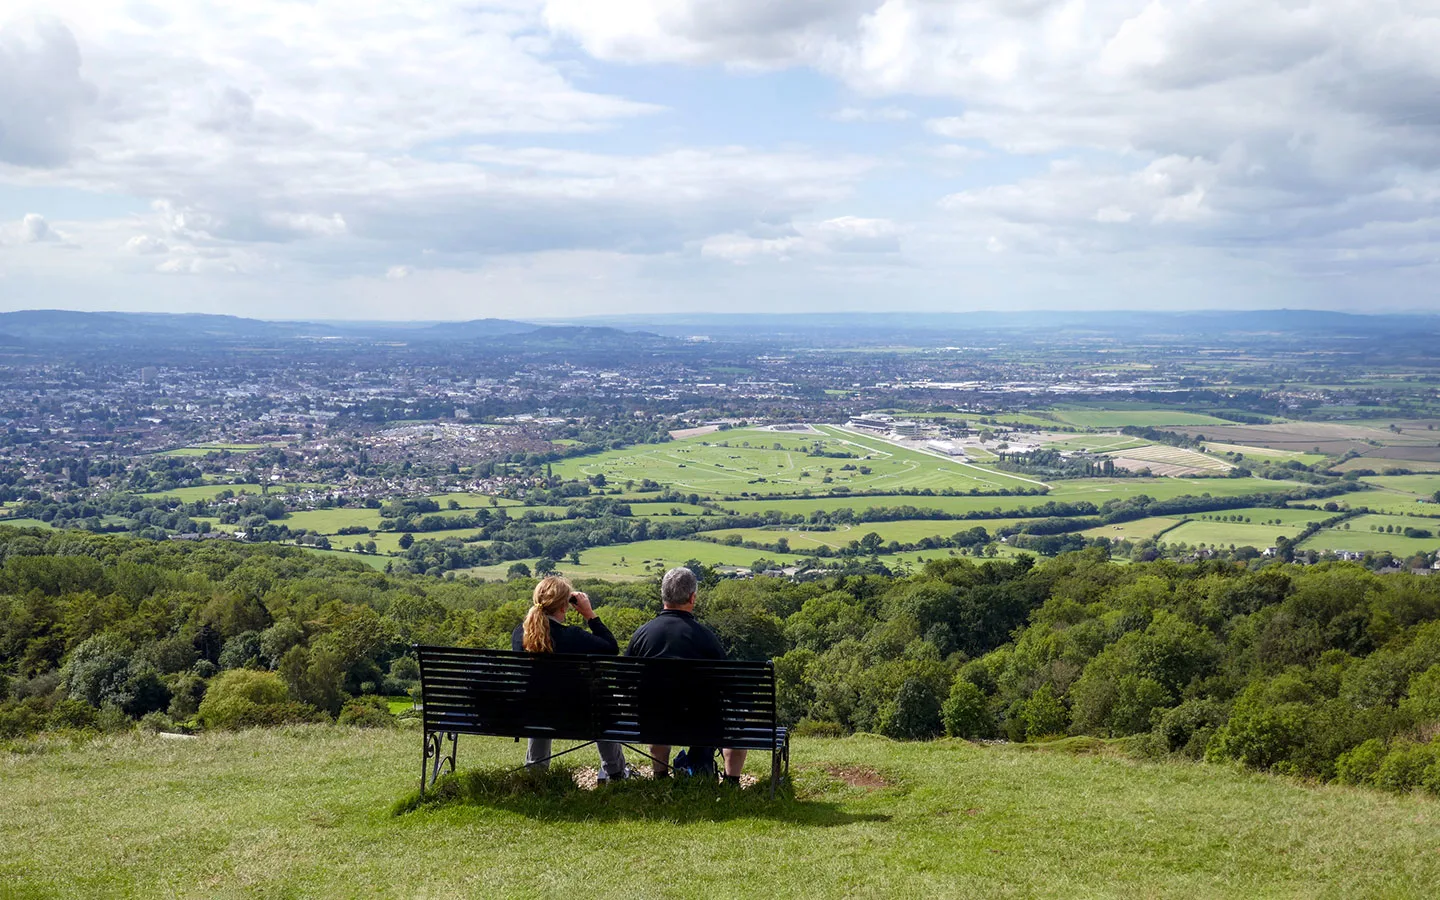 Looking down on Cheltenham from Cleeve Hill